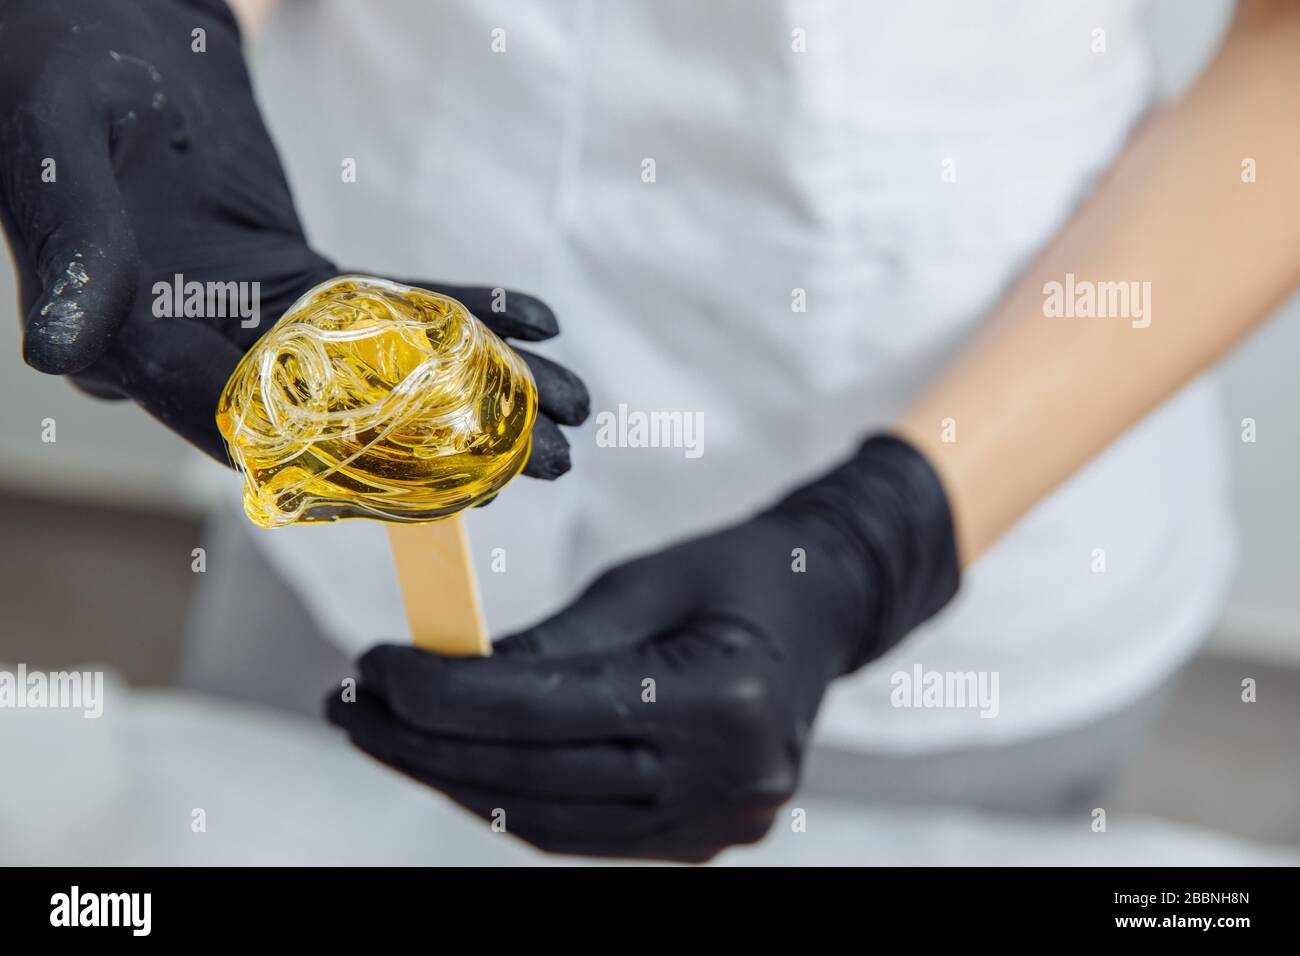 The wax is wound on a wooden spatula. The wax is intended for depilation. The spatula is held by hands in latex gloves.  Stock Photo